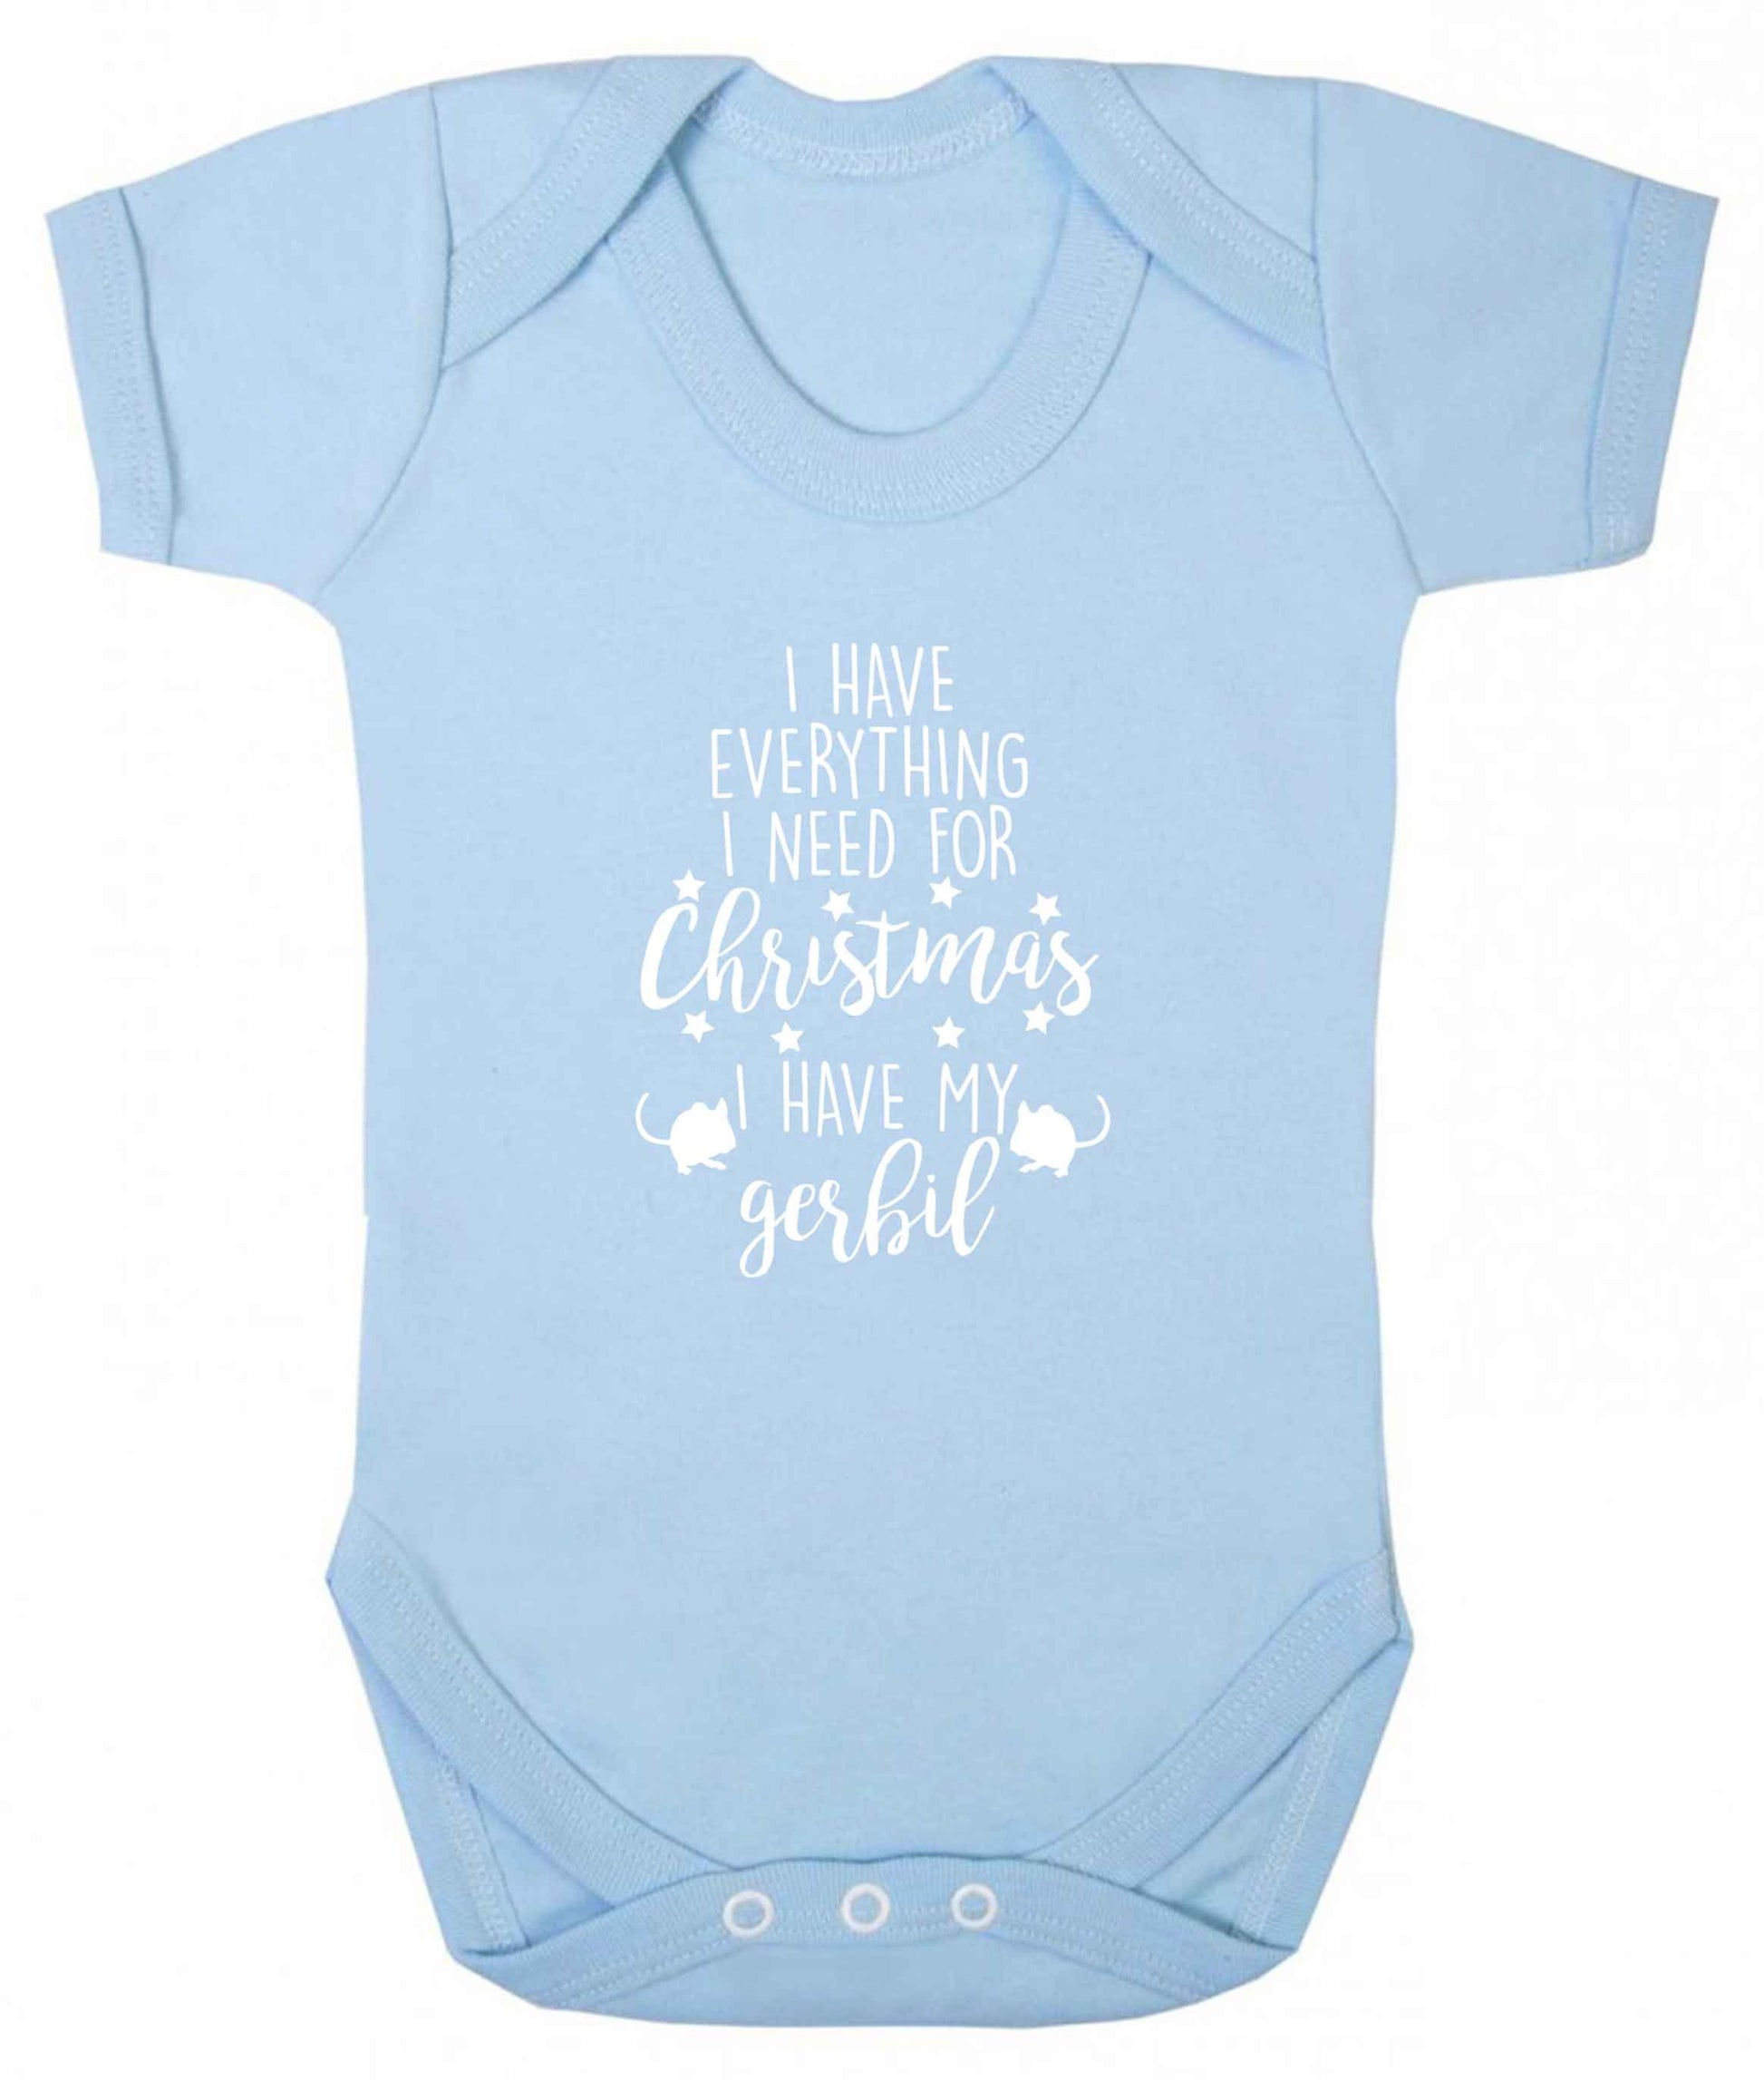 I have everything I need for Christmas I have my gerbil baby vest pale blue 18-24 months